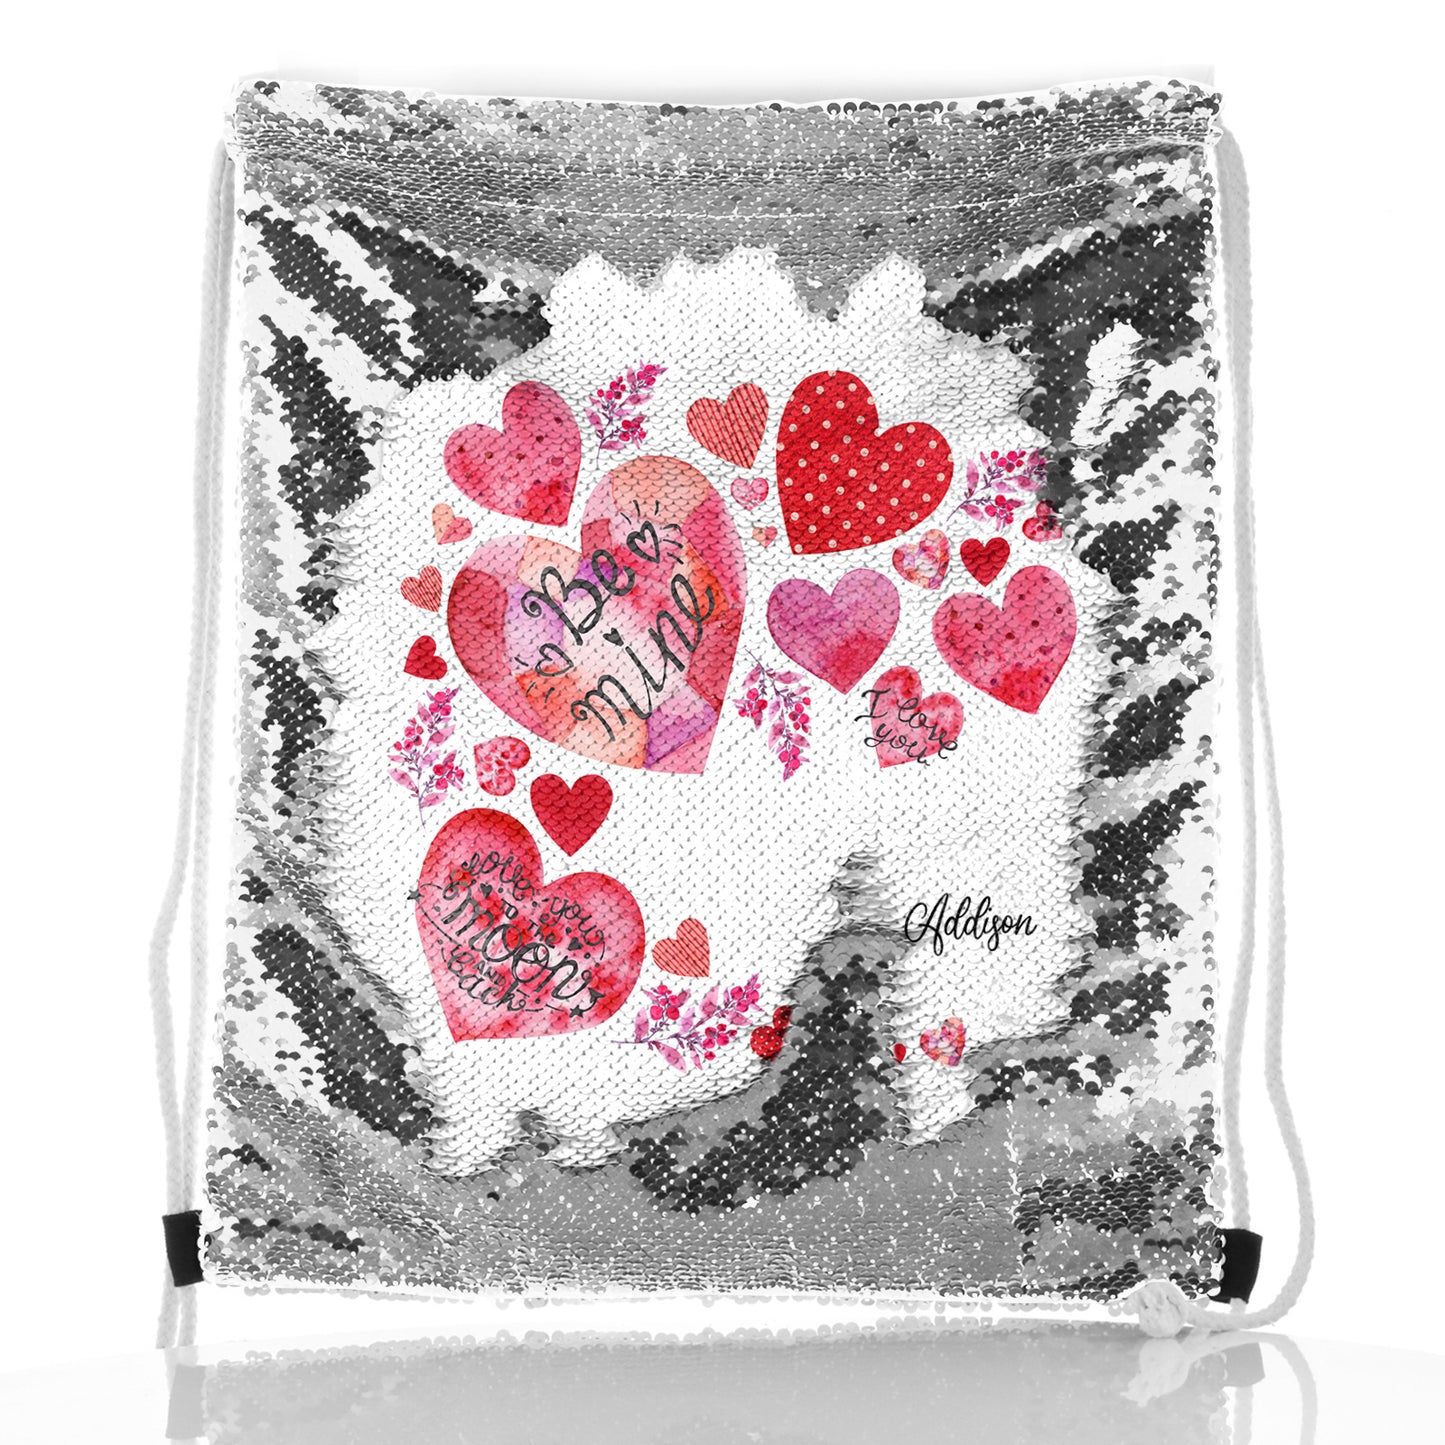 Personalised Sequin Drawstring Backpack with Stylish Text and Material Hearts Love Message Print